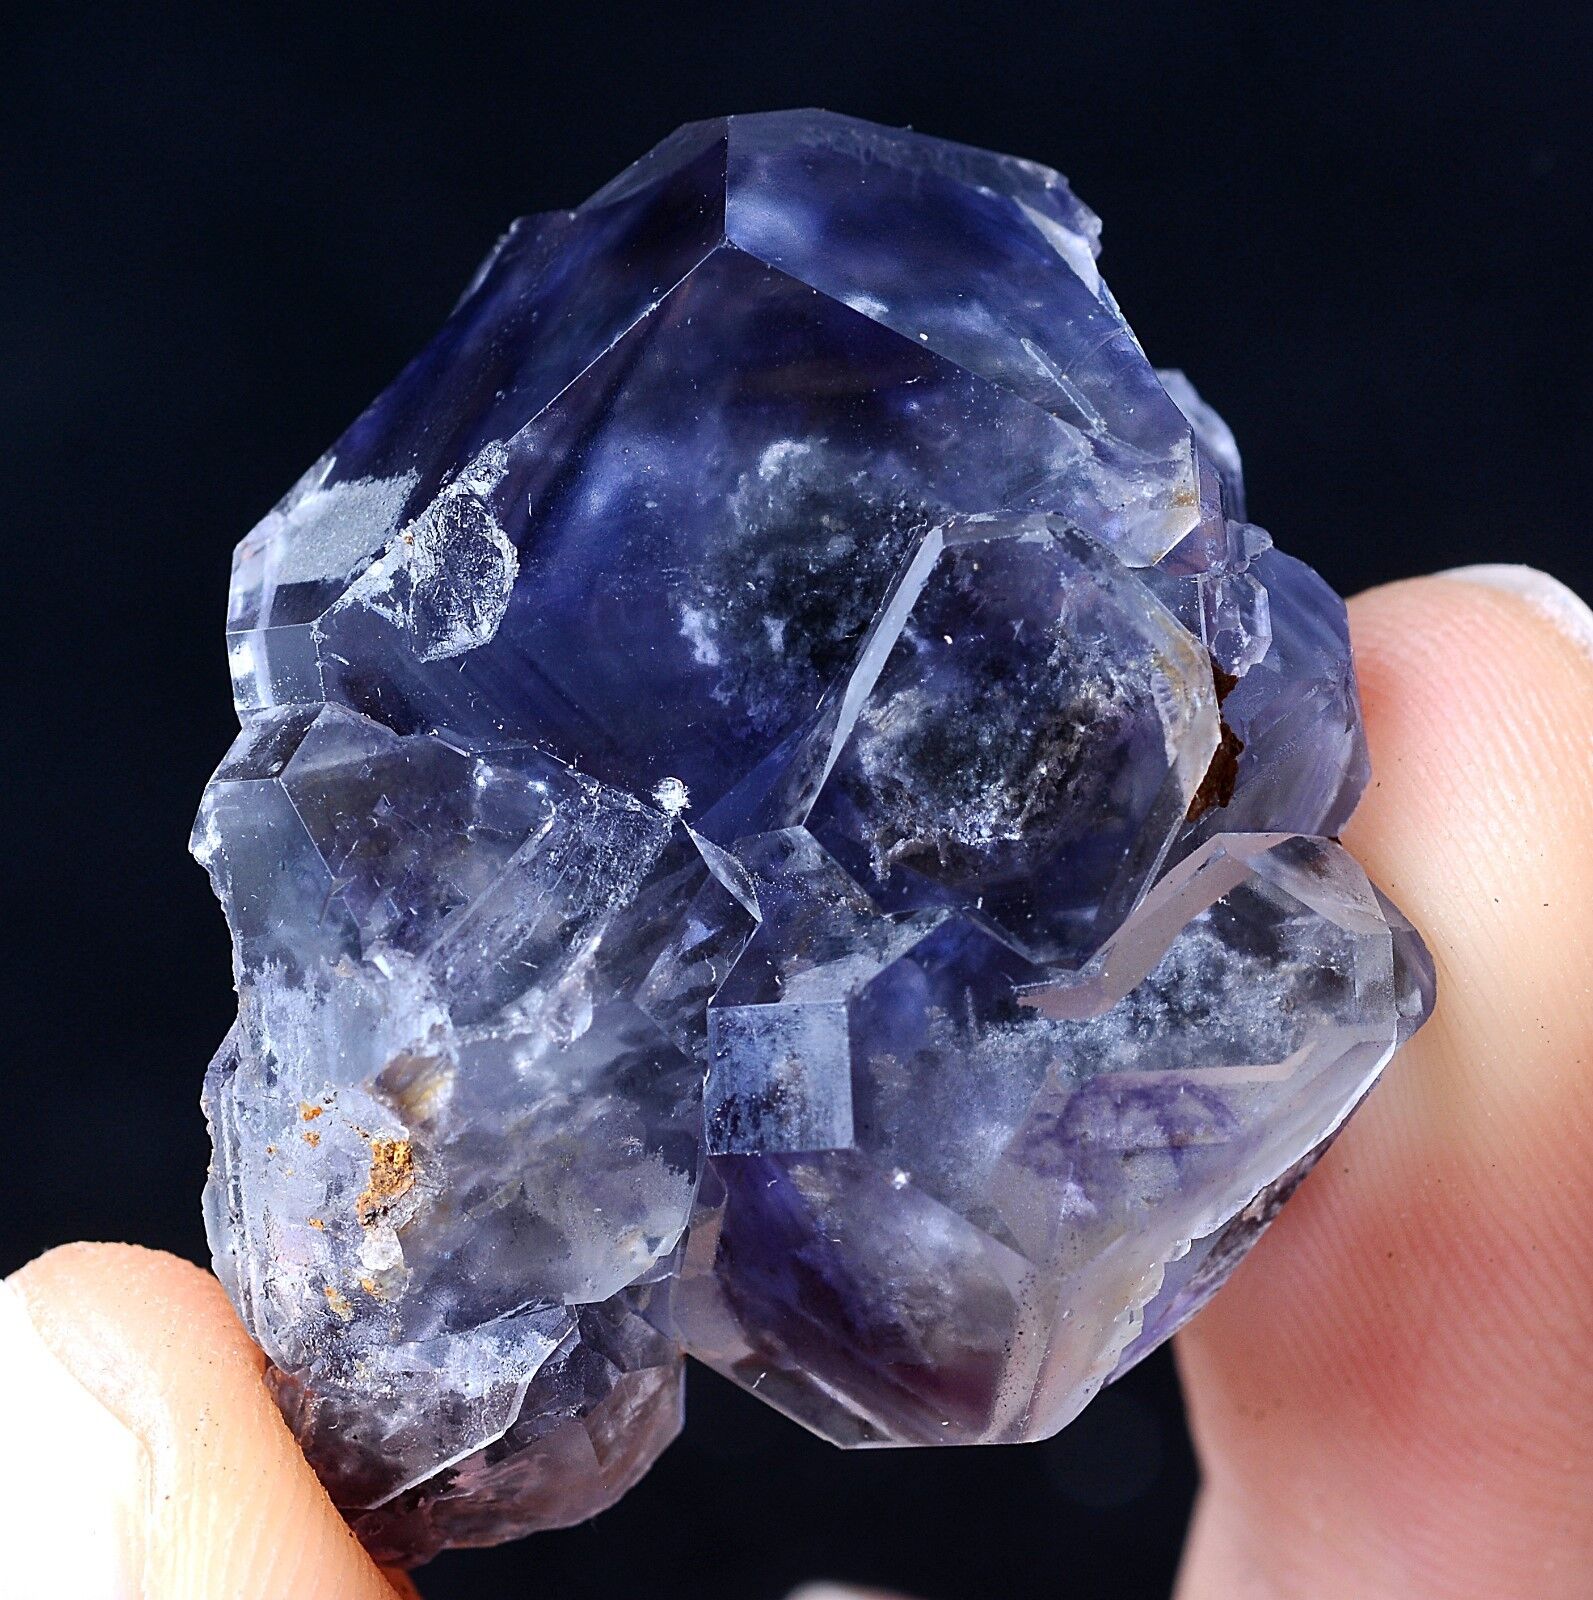 China / Newly DISCOVERED RARE PURPLE FLUORITE CRYSTAL MINERAL SPECIMEN   22.35g